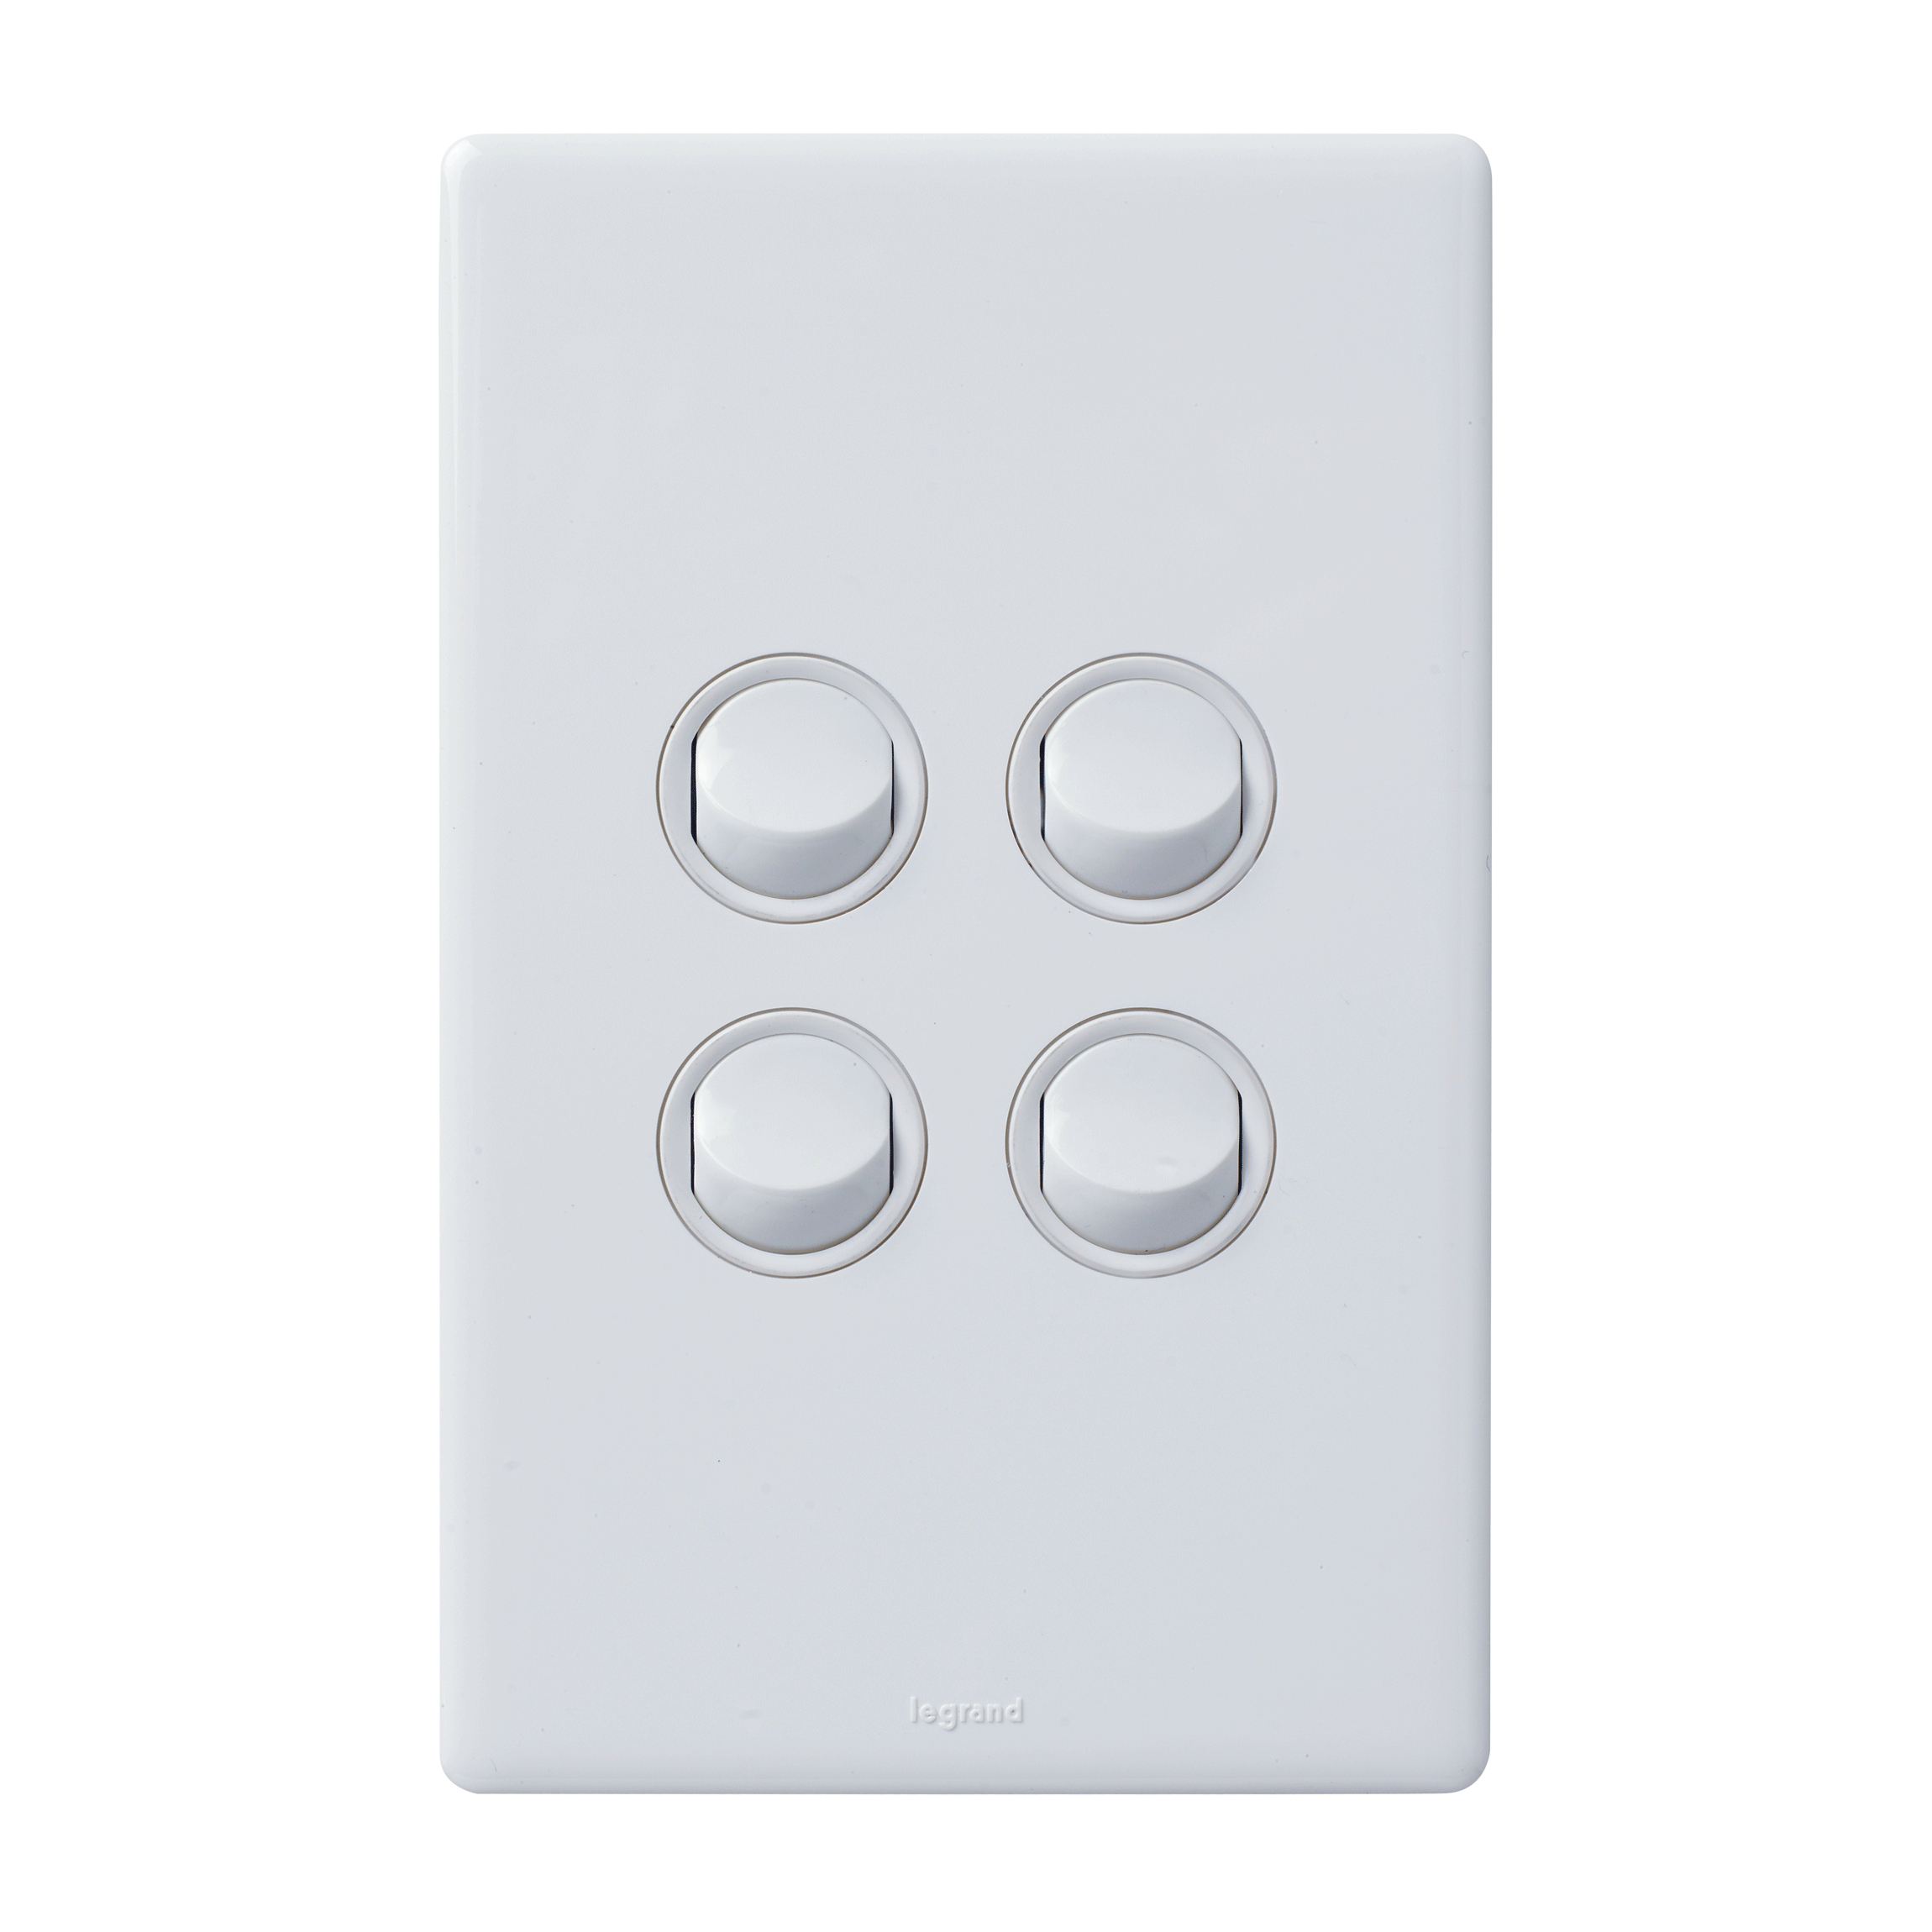 16A 4-GANG SWITCH WHITE, EXCEL LIFE